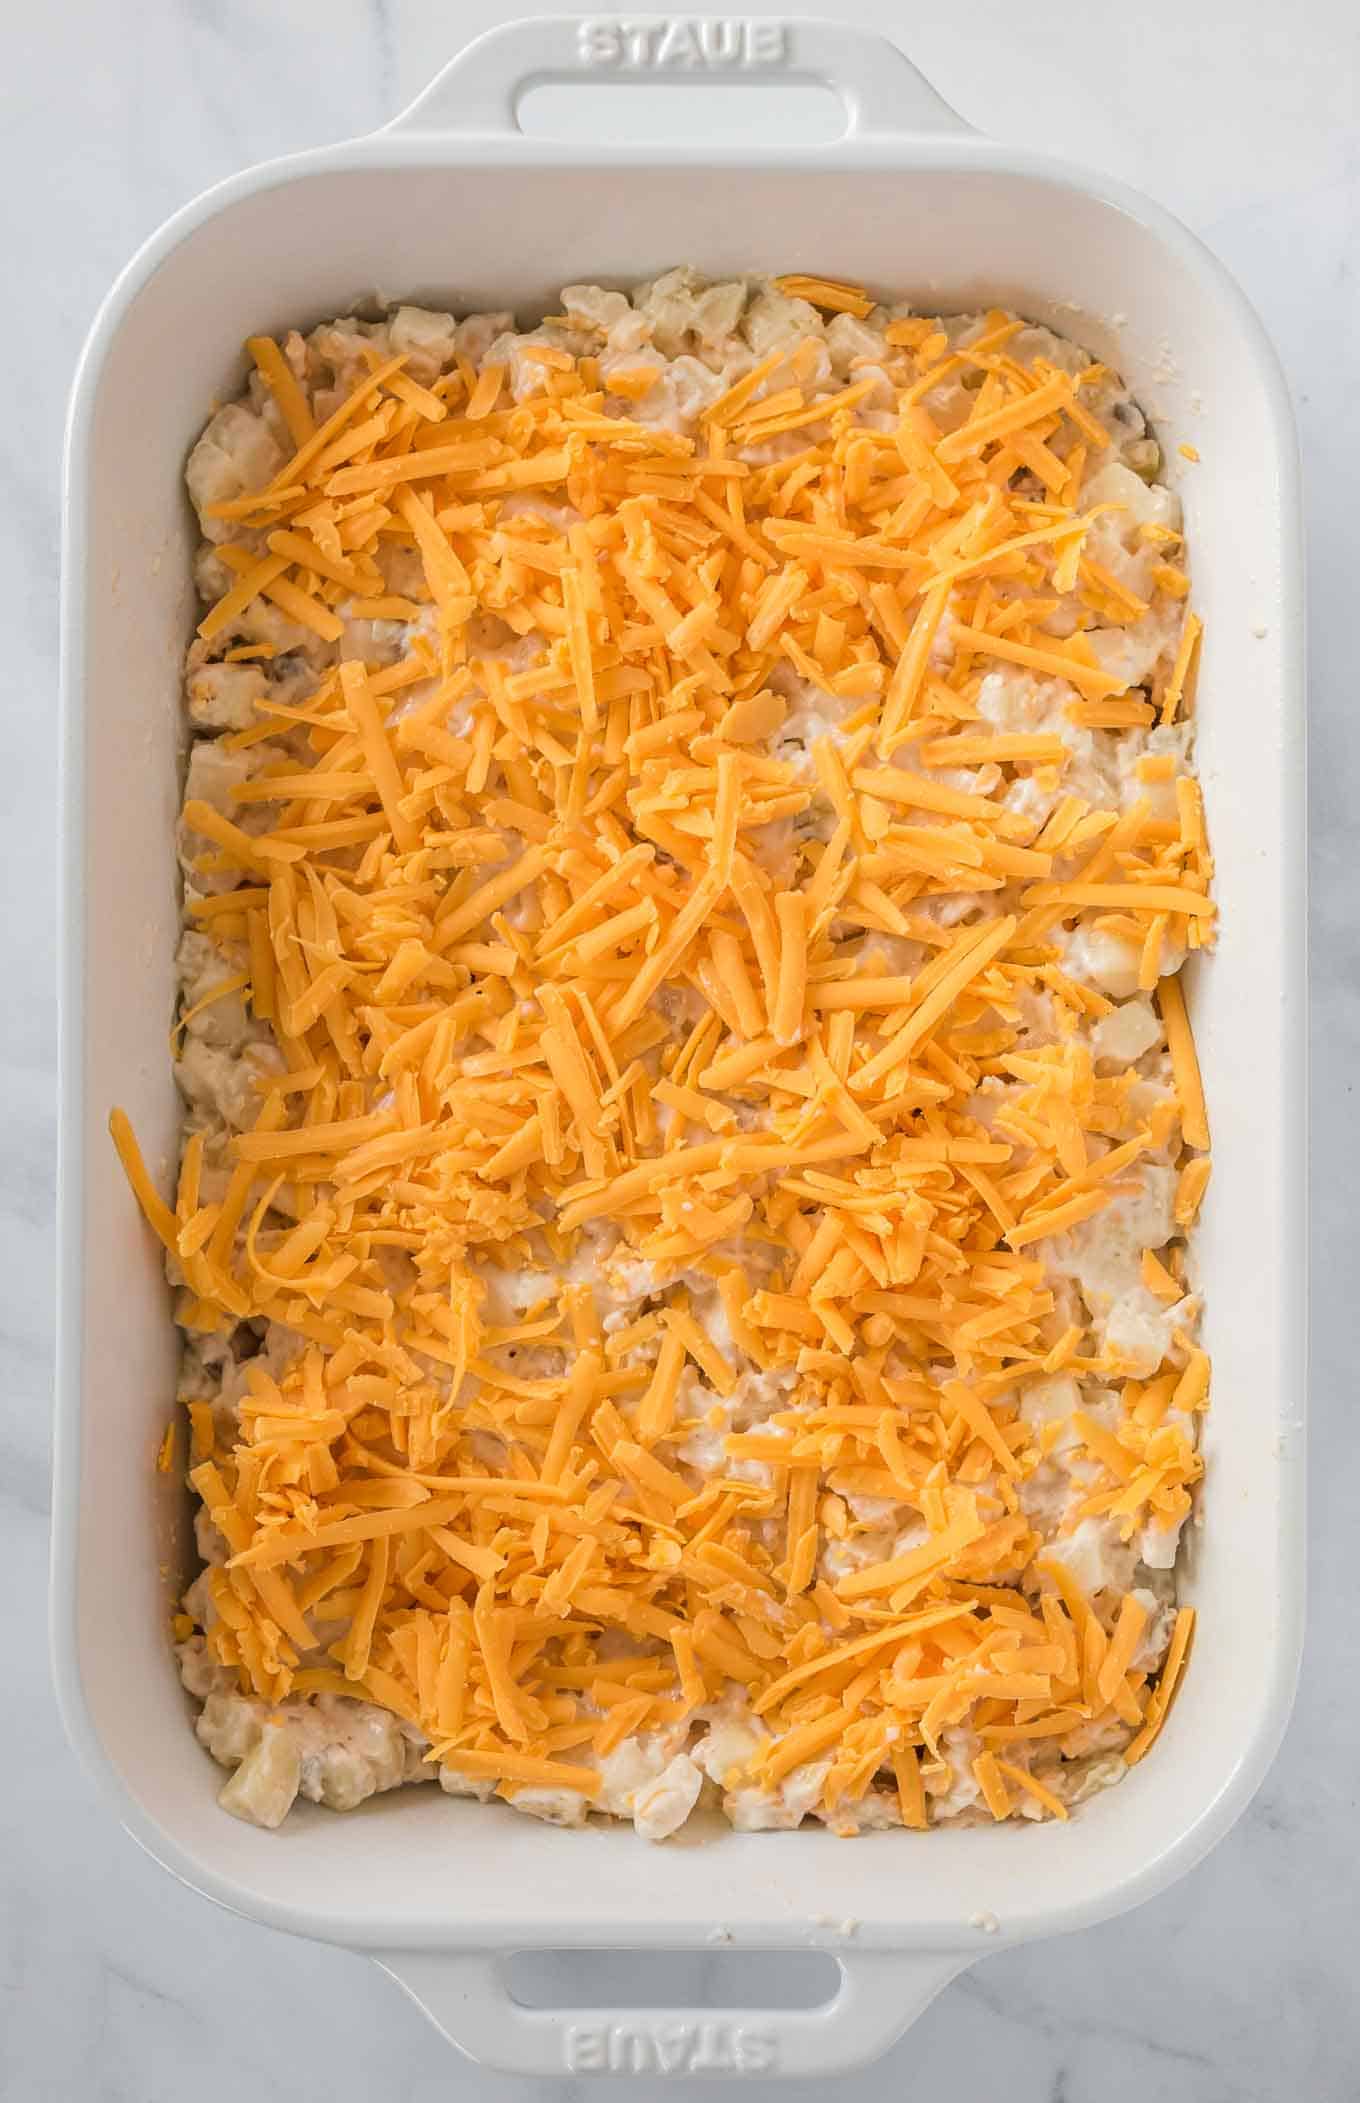 sprinkled fresh cheddar cheese on top of the funeral potato filling